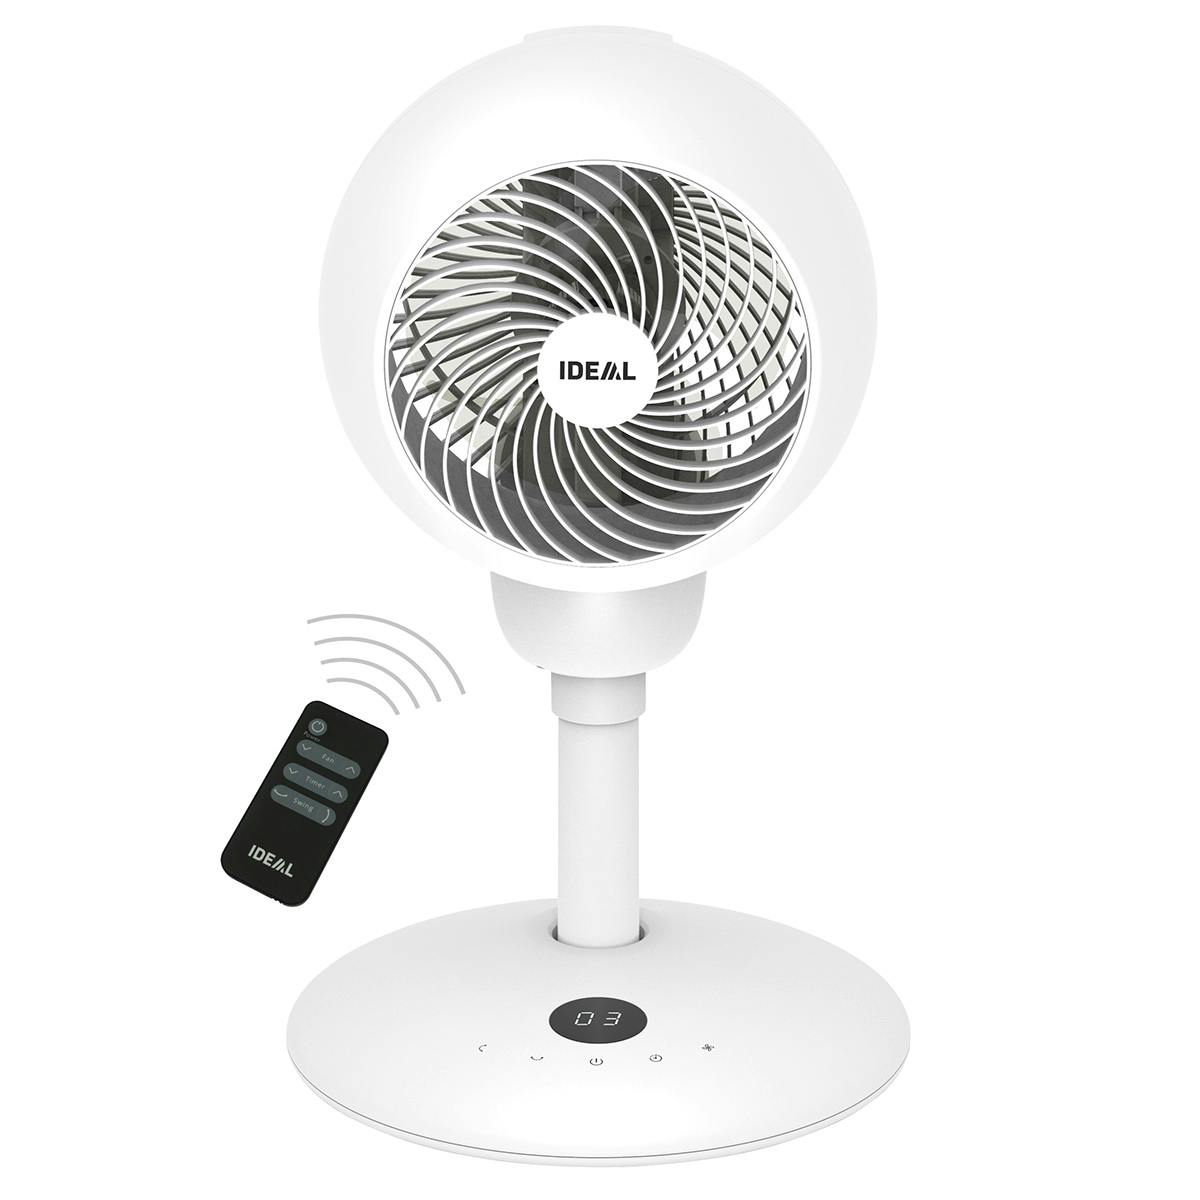 IDEAL FAN1 with remote